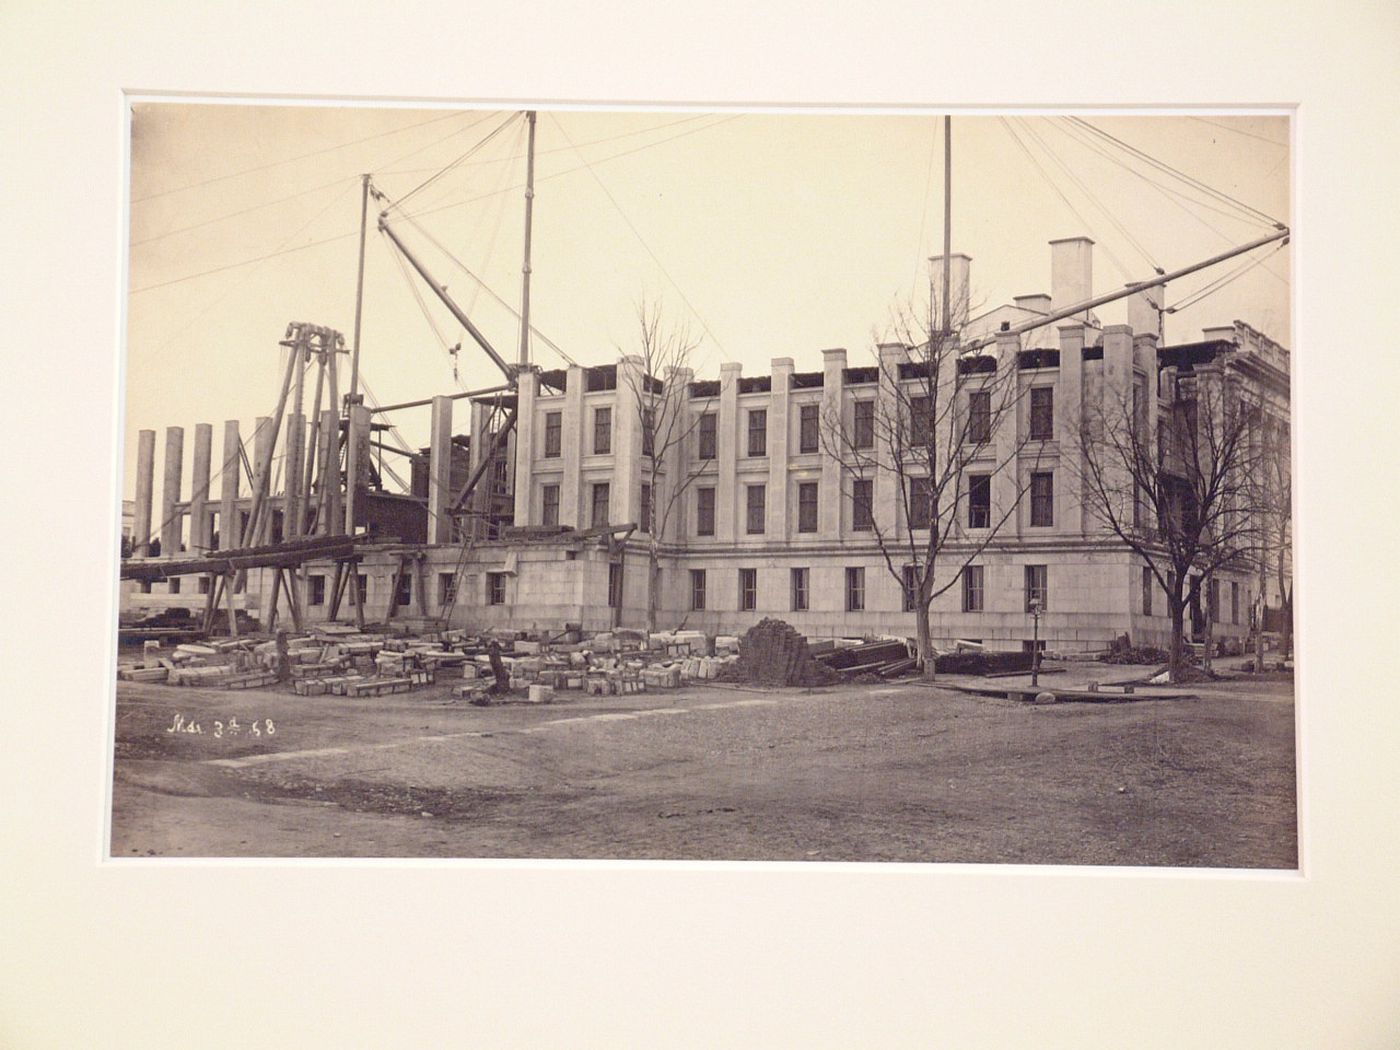 Treasury Building under contruction: Working on a second story, Washington, District of Columbia